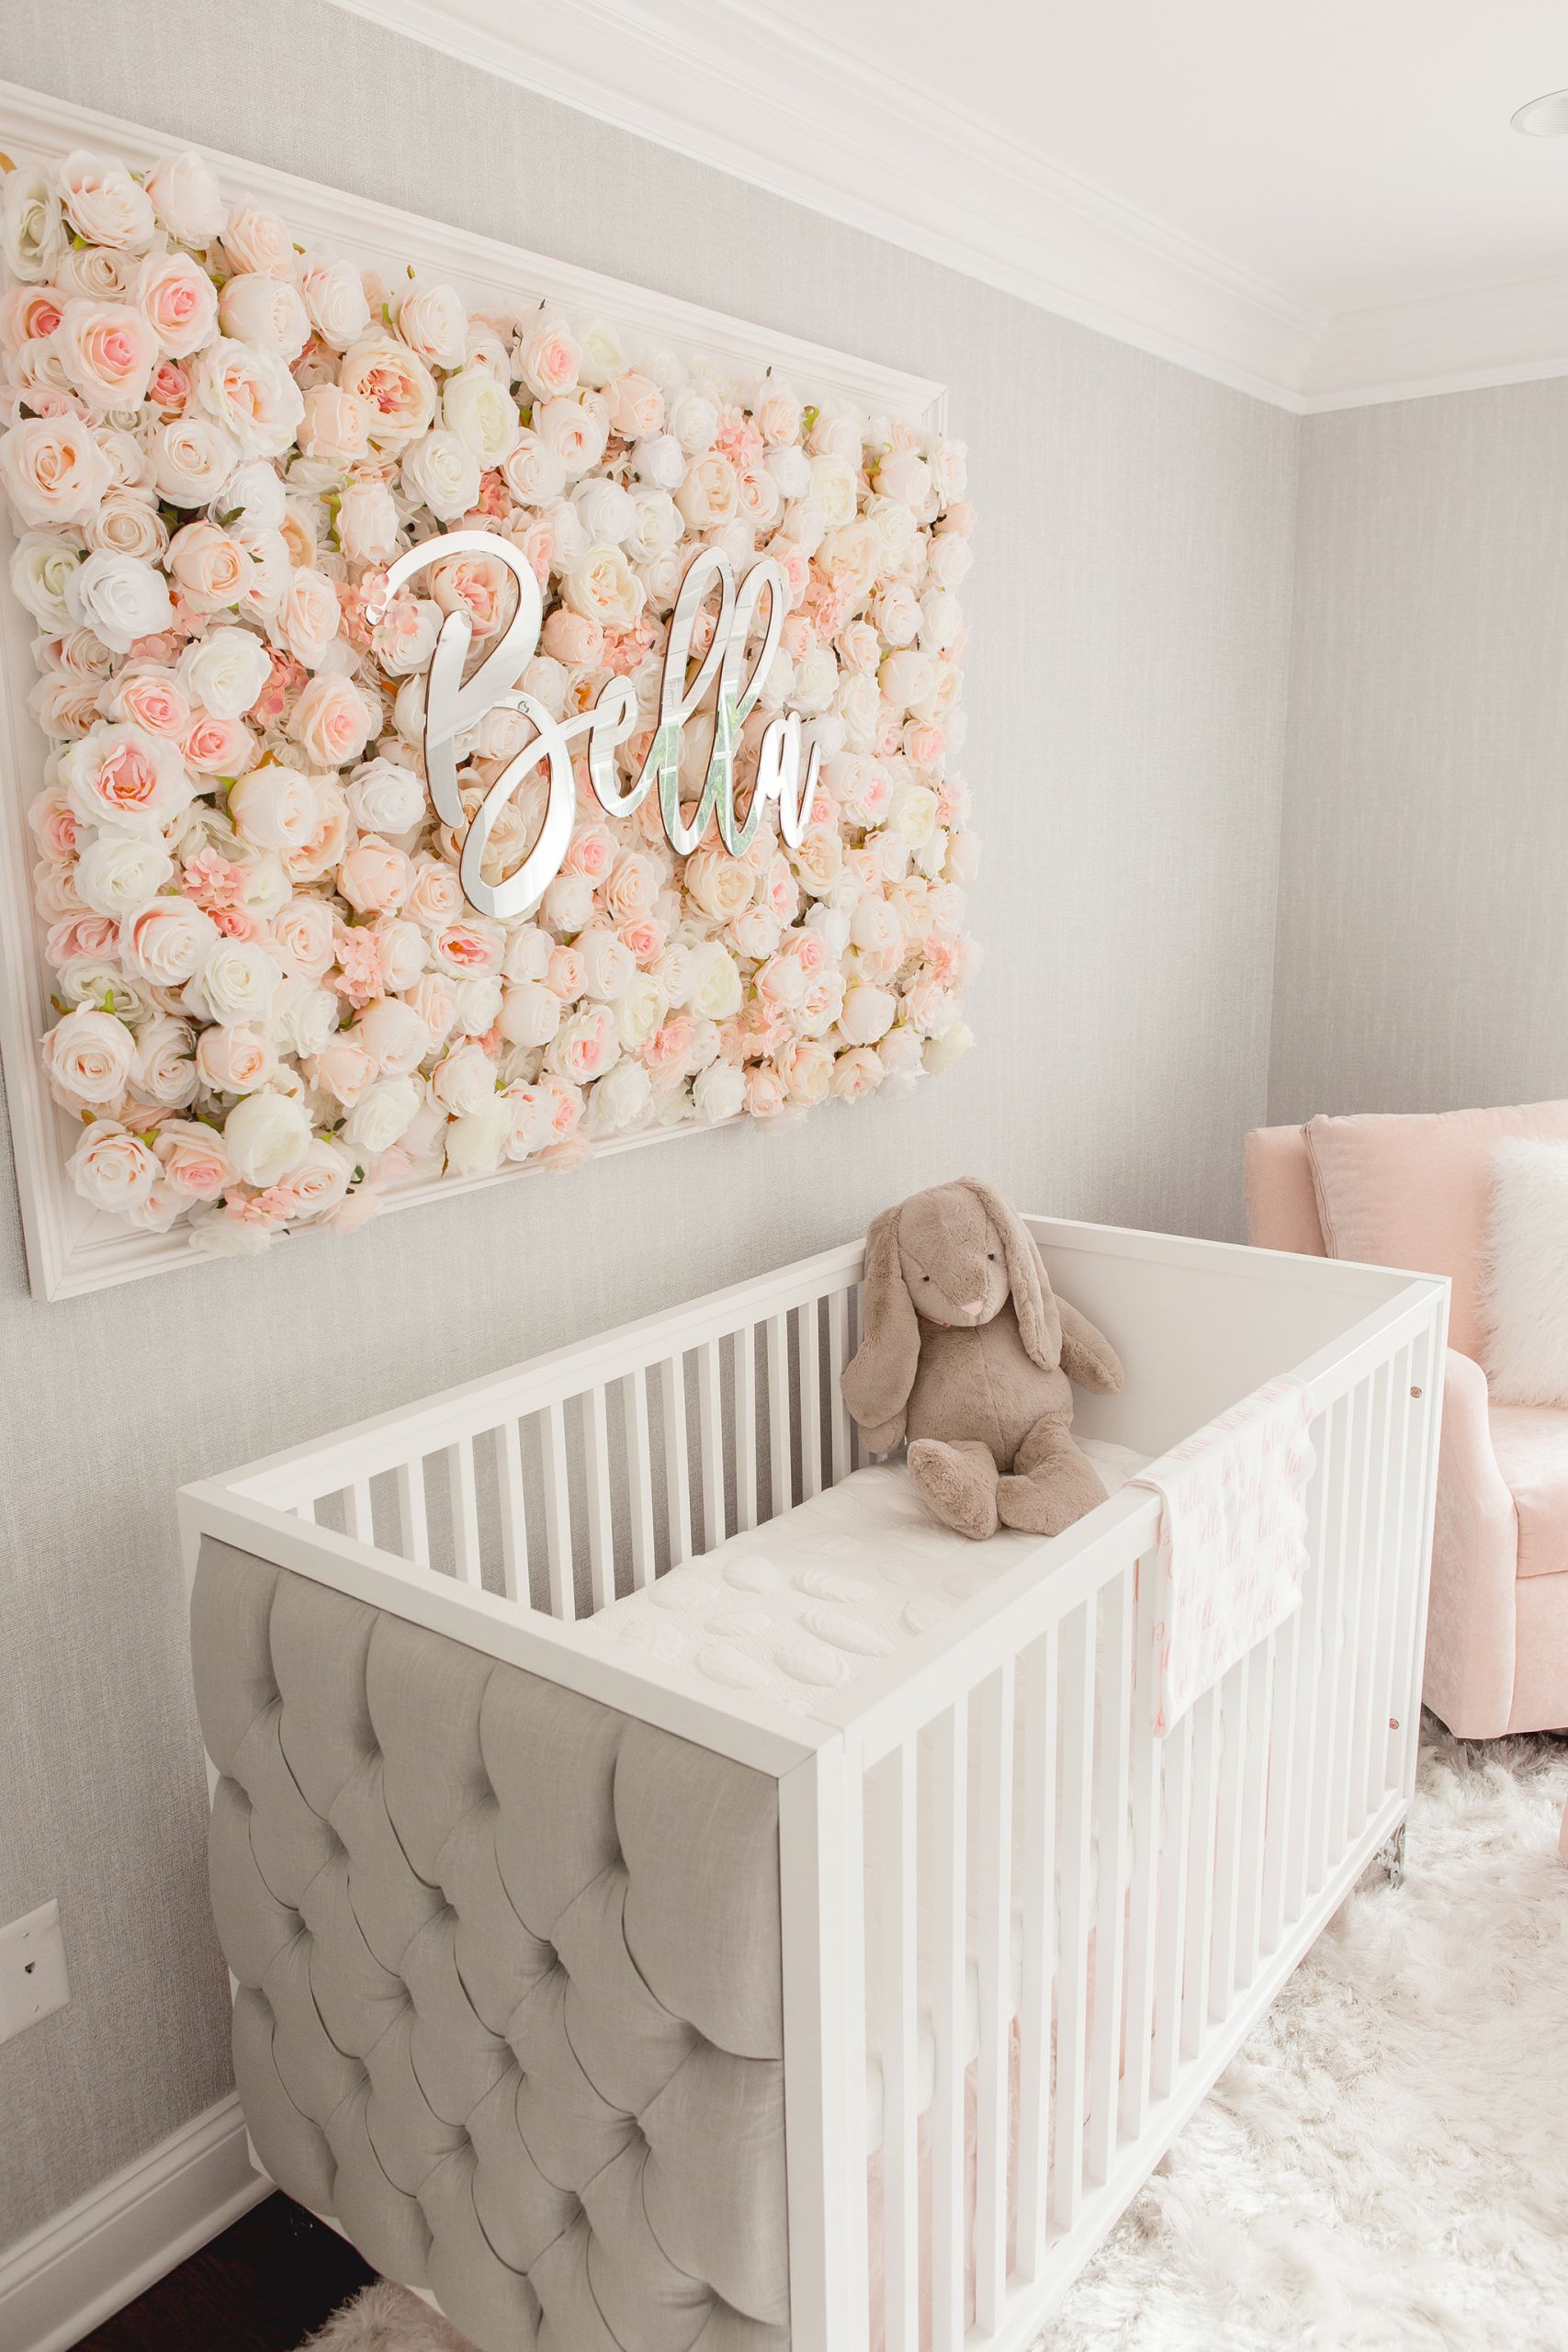 Baby Room Wall Decorating Ideas
 Guess Which Celebrity Nursery Inspired this Gorgeous Space